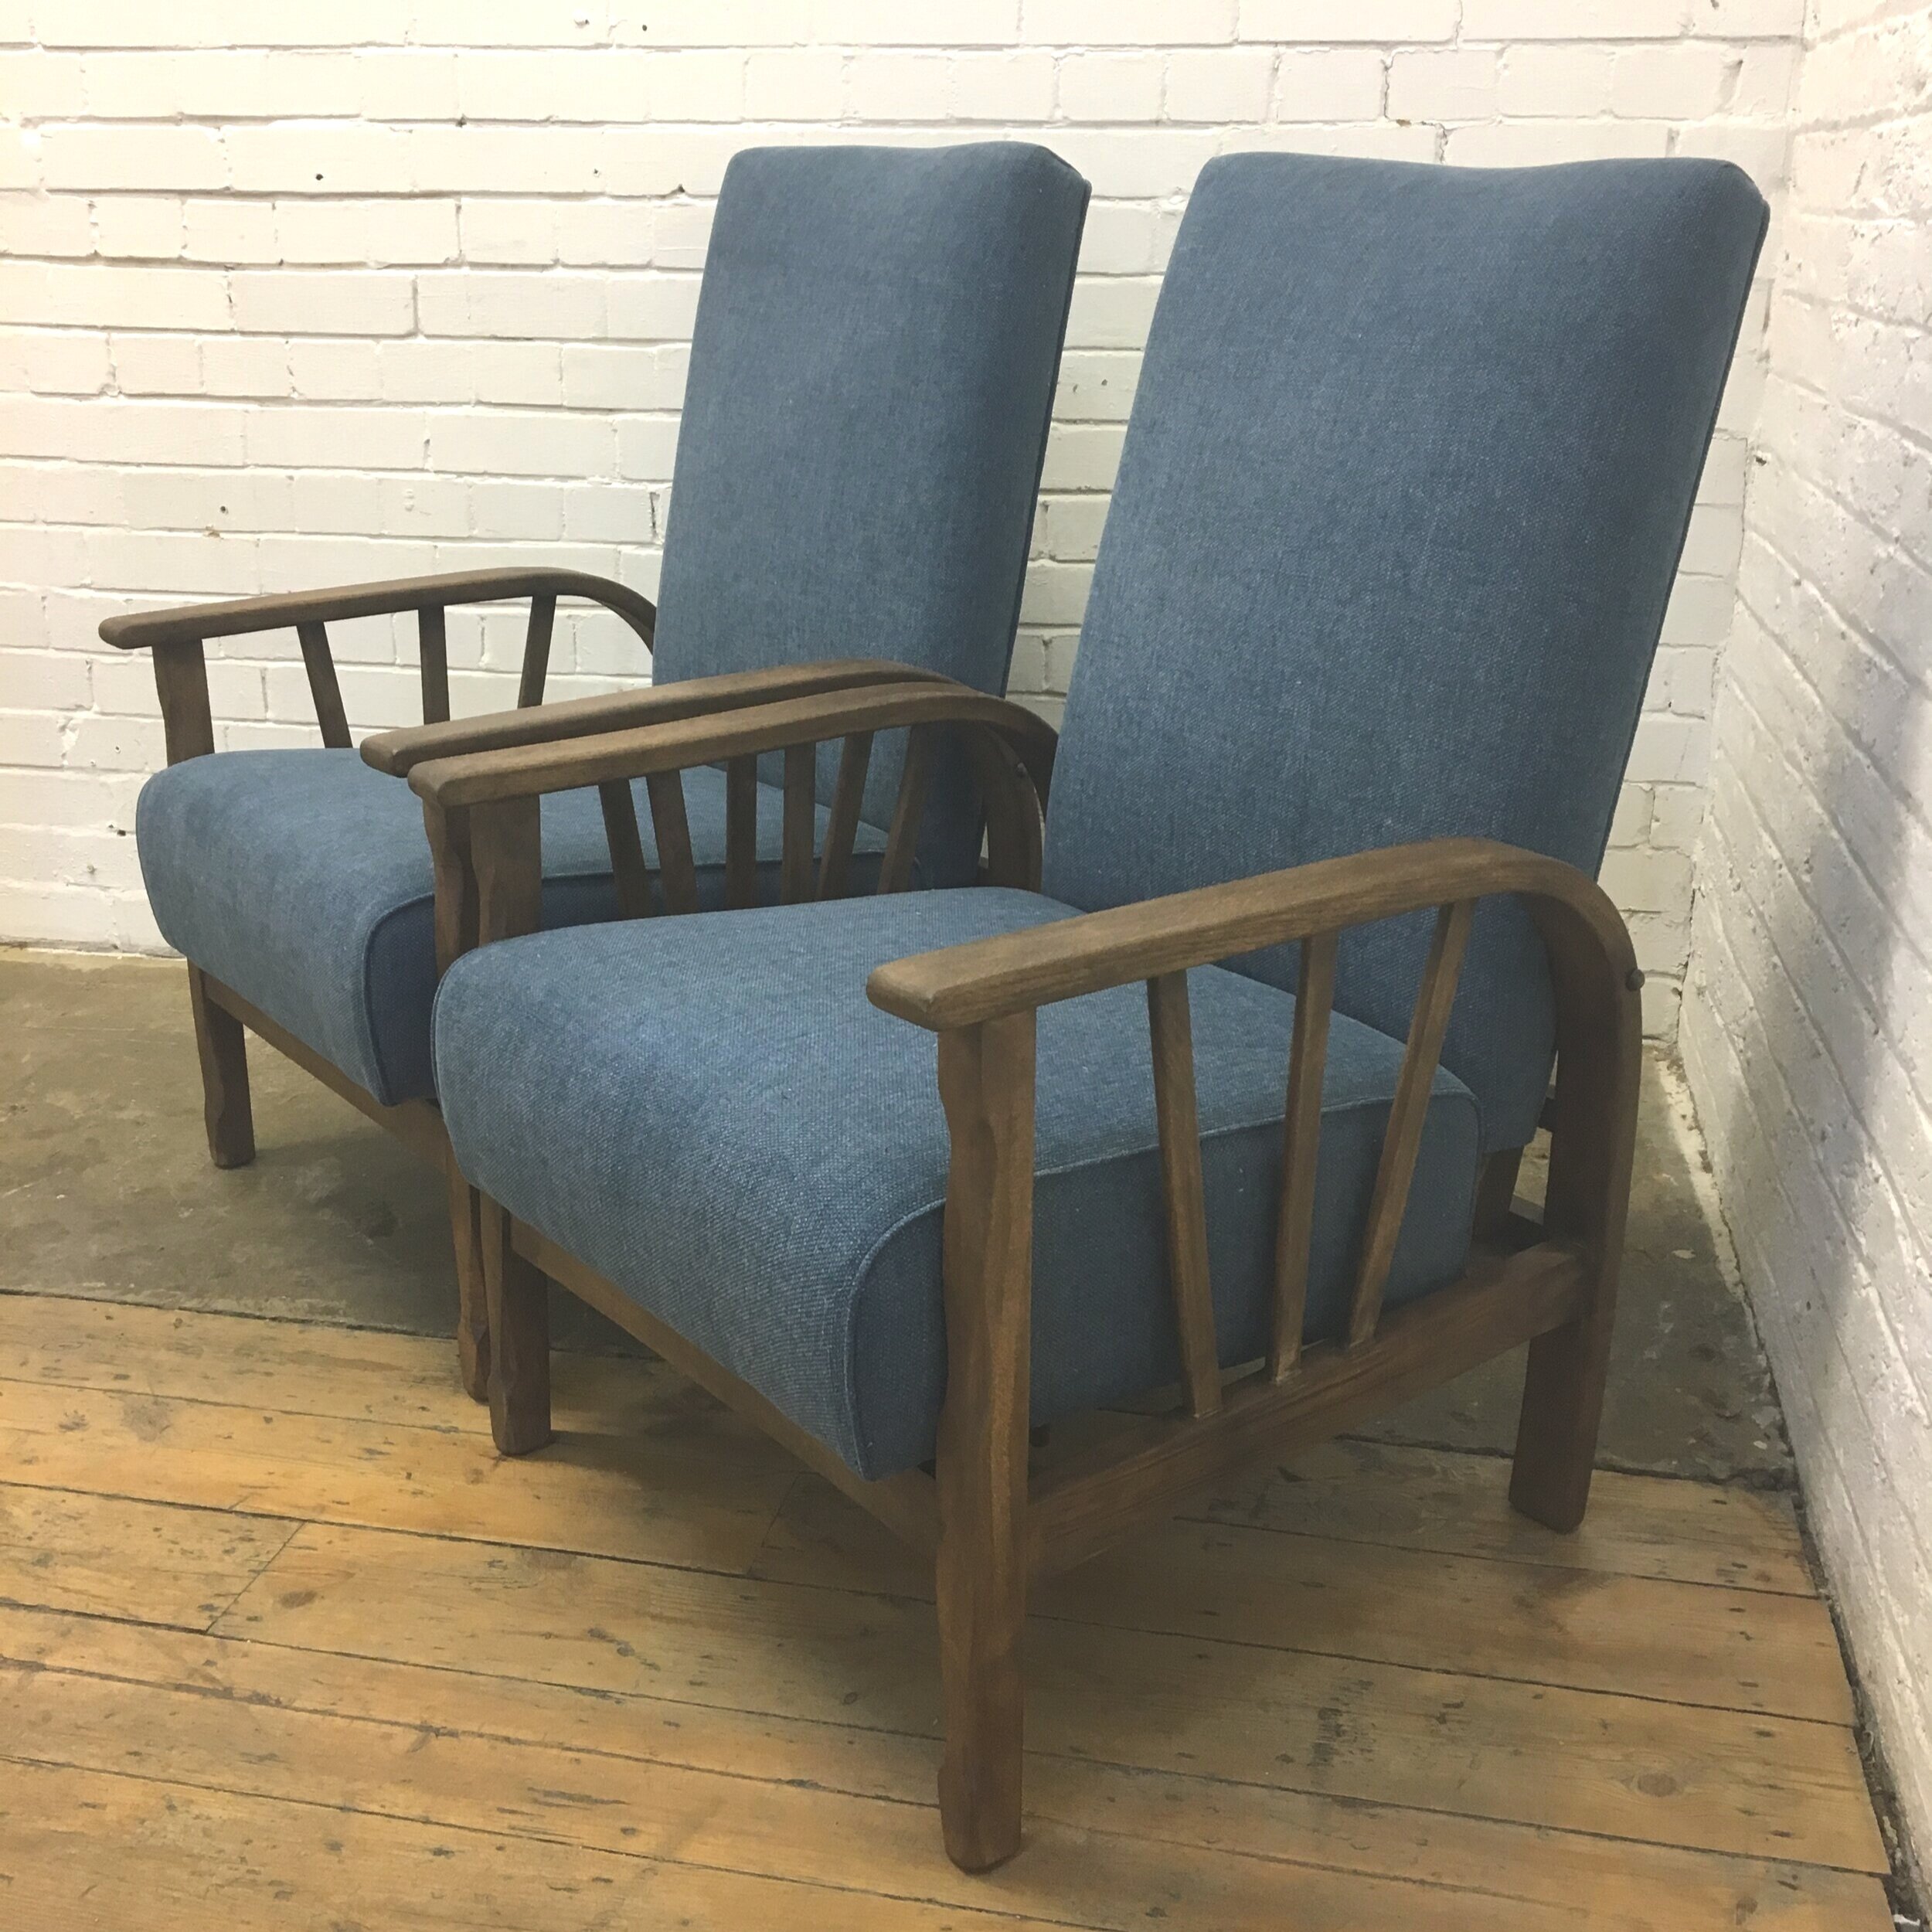 Wood Furniture Restoration of Pair of Chairs